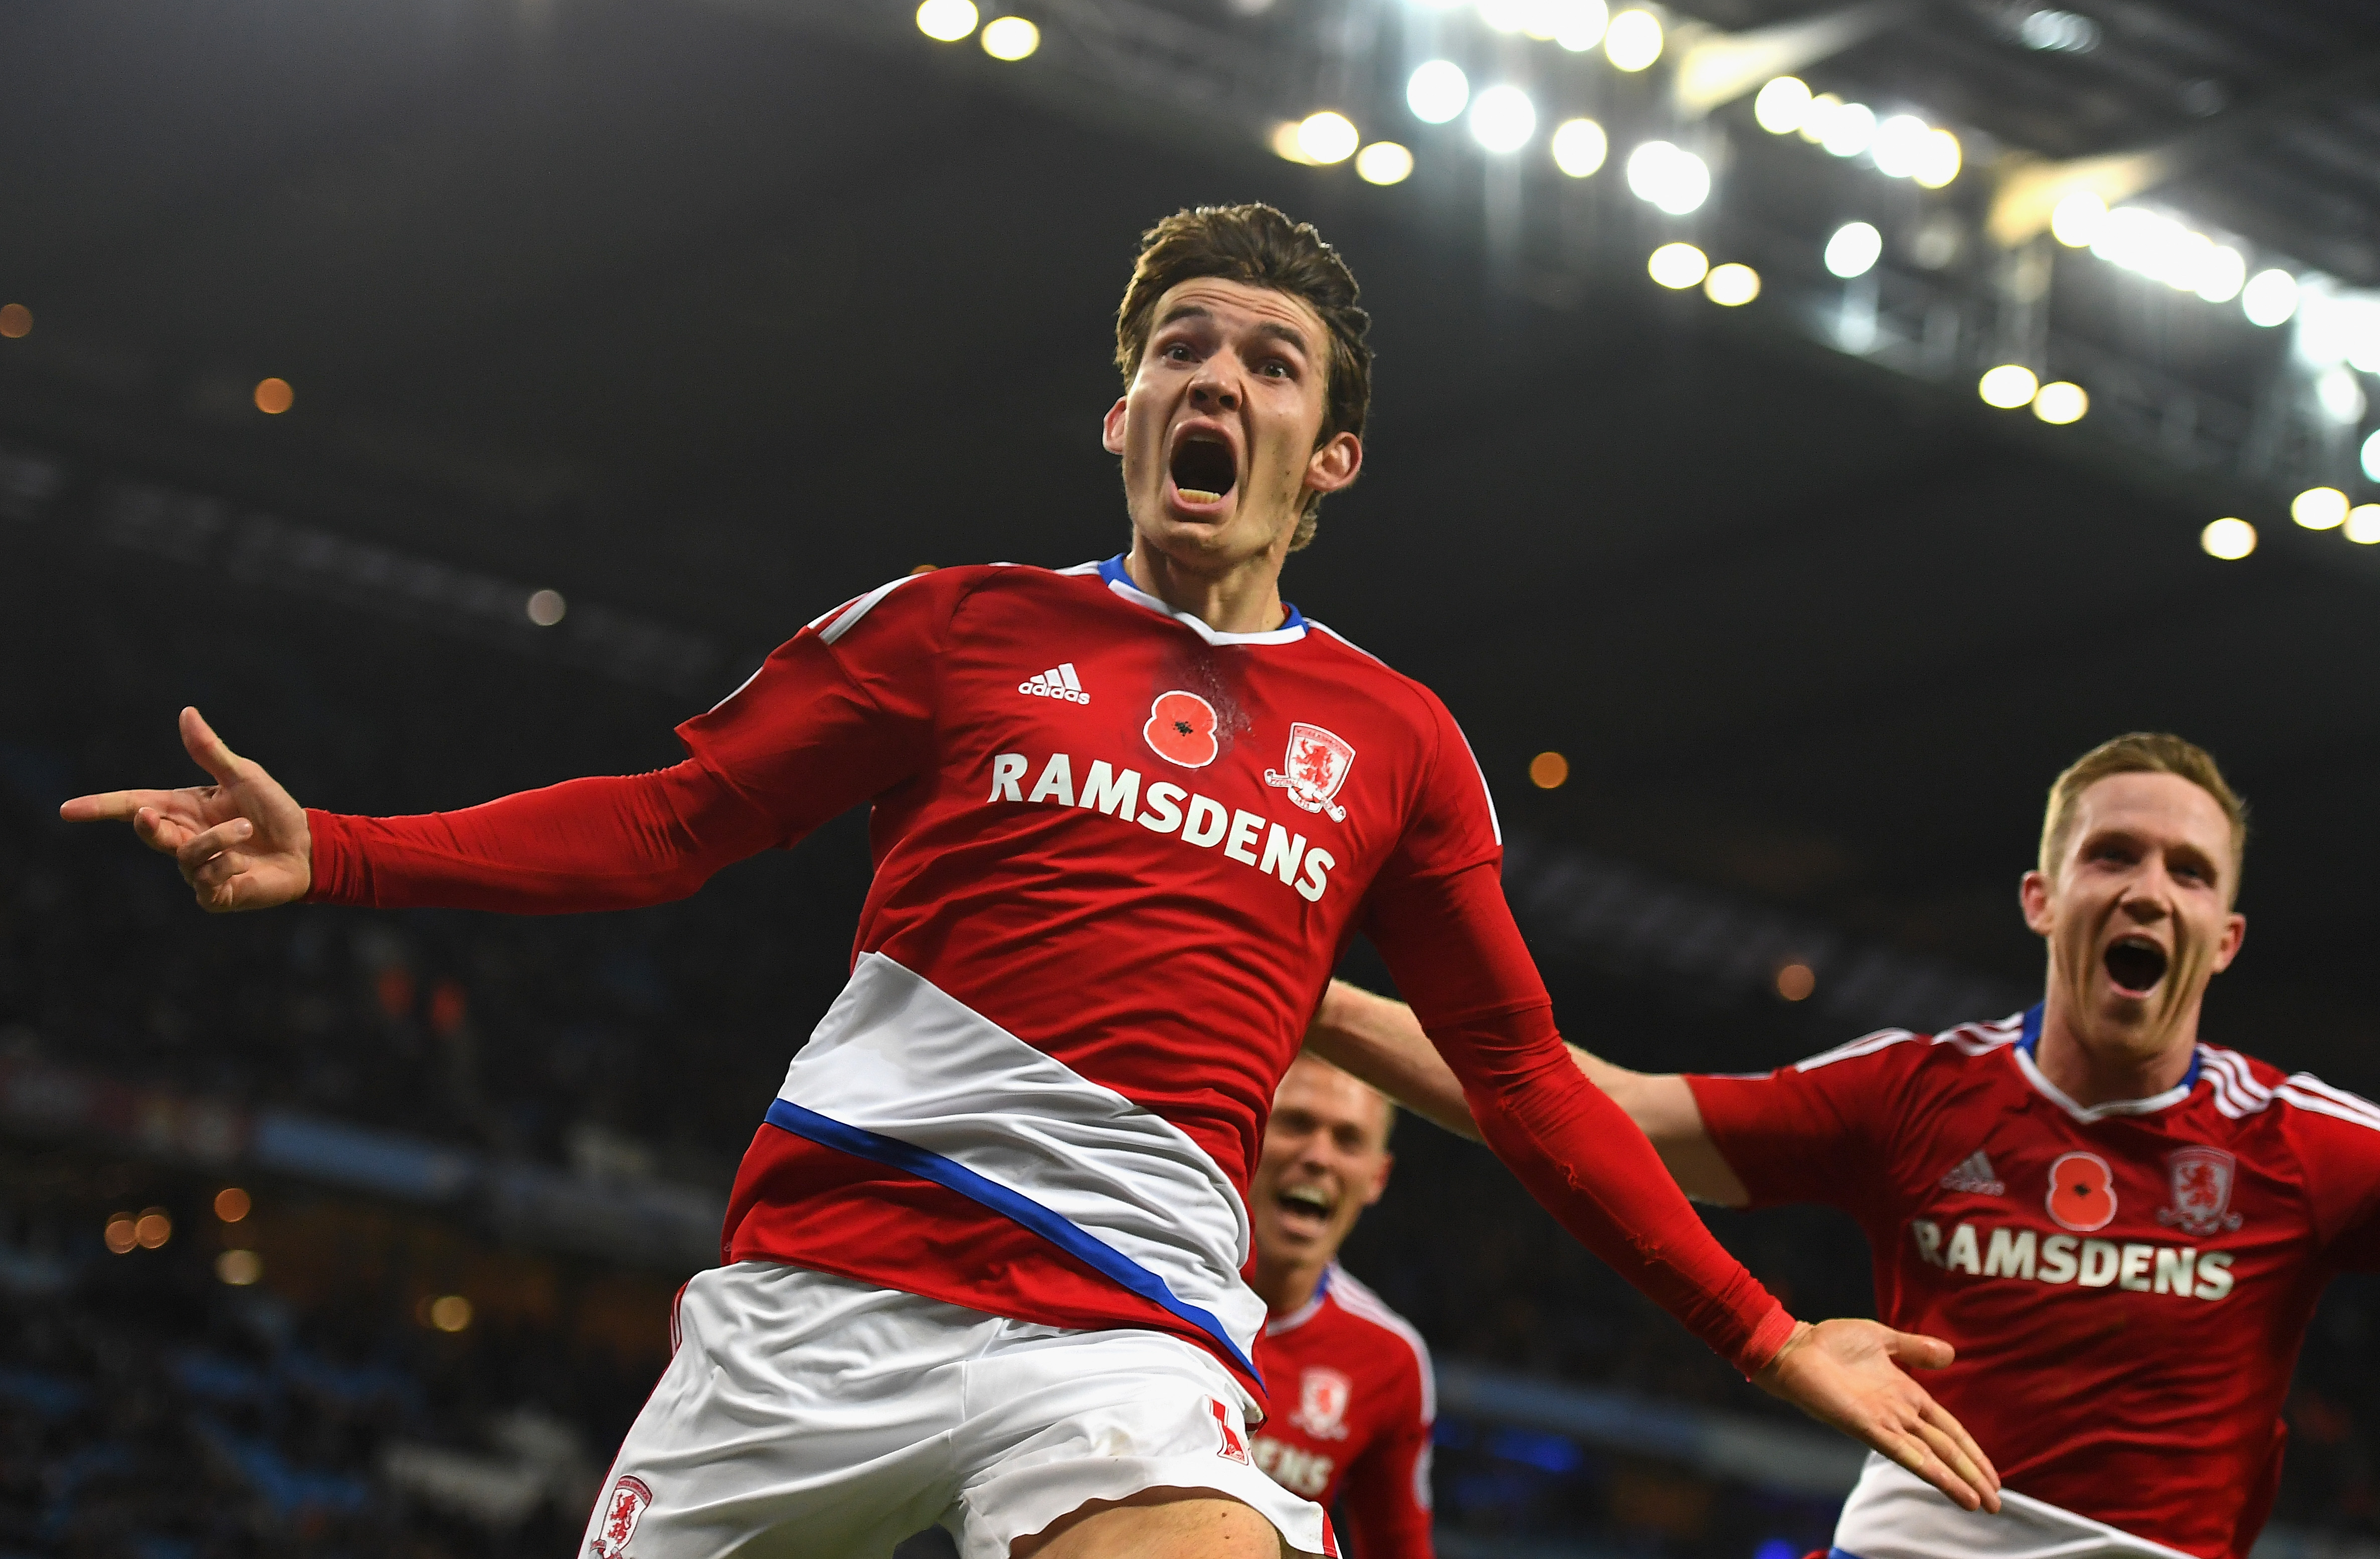 MANCHESTER, ENGLAND - NOVEMBER 05: Marten de Roon of Middlesbrough celebrates scoring his sides first goal during the Premier League match between Manchester City and Middlesbrough at Etihad Stadium on November 5, 2016 in Manchester, England.  (Photo by Laurence Griffiths/Getty Images)